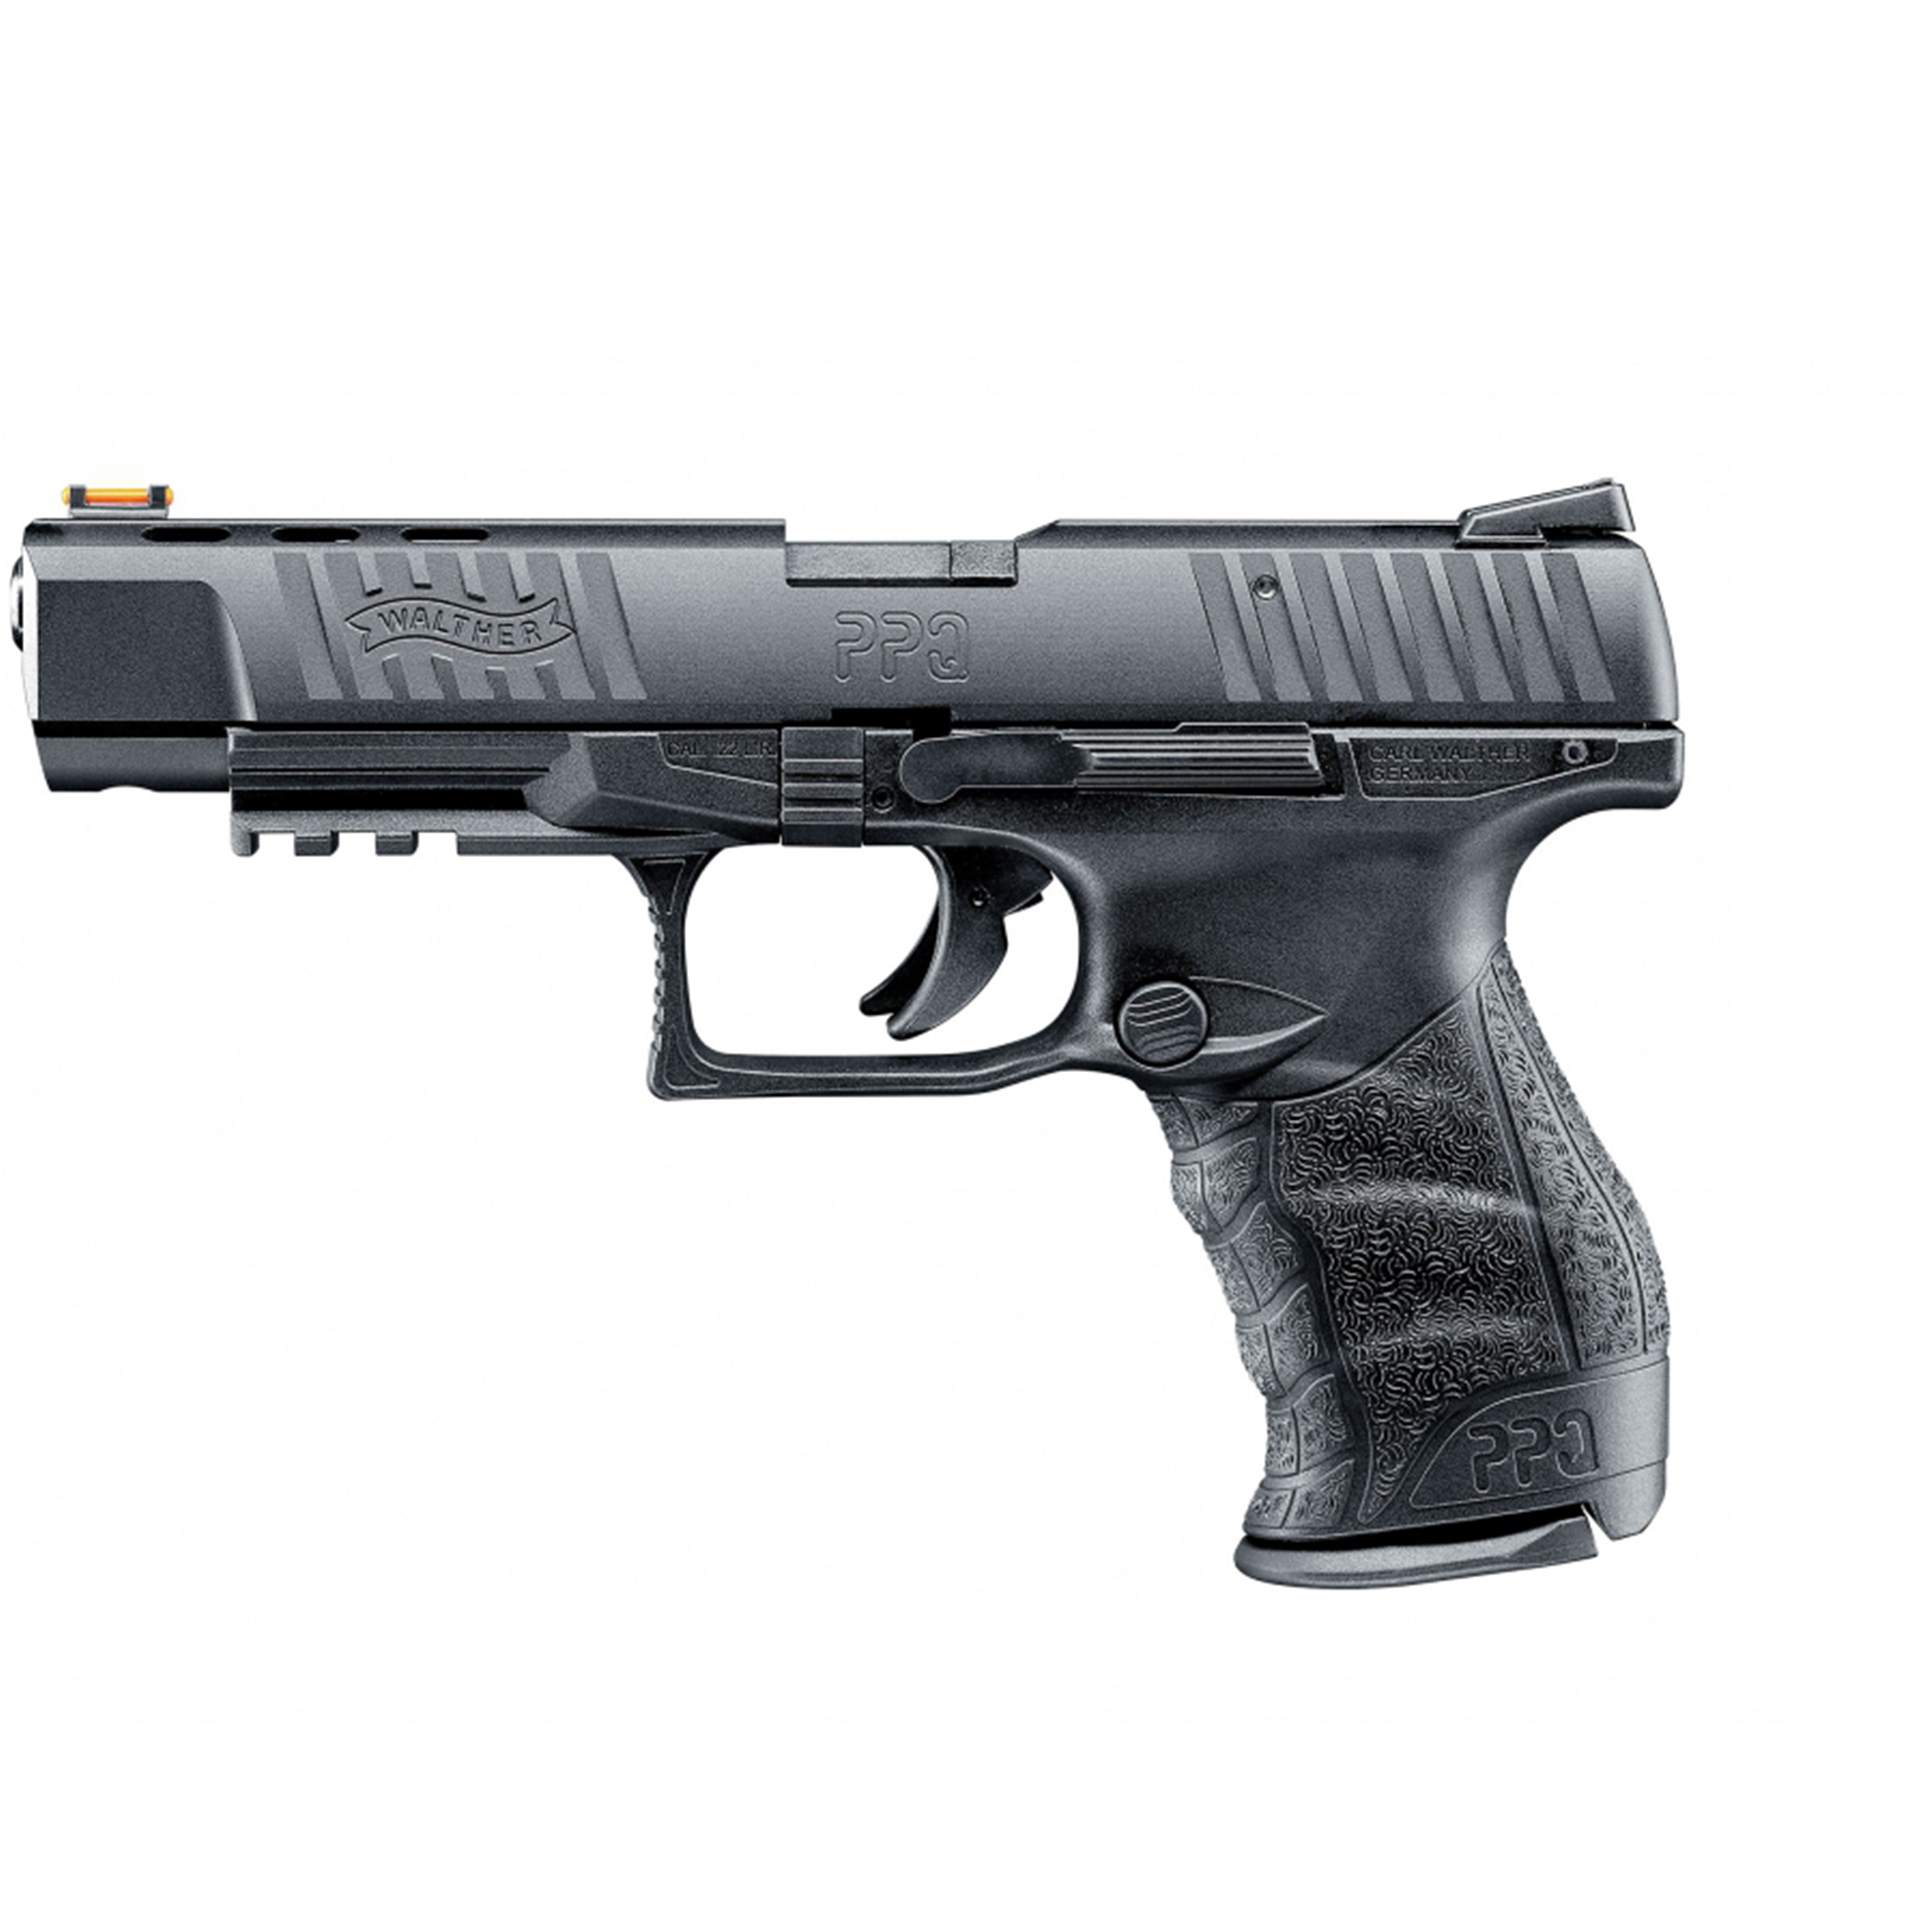 WALTHER VT PPQ M2 in .22 lr.